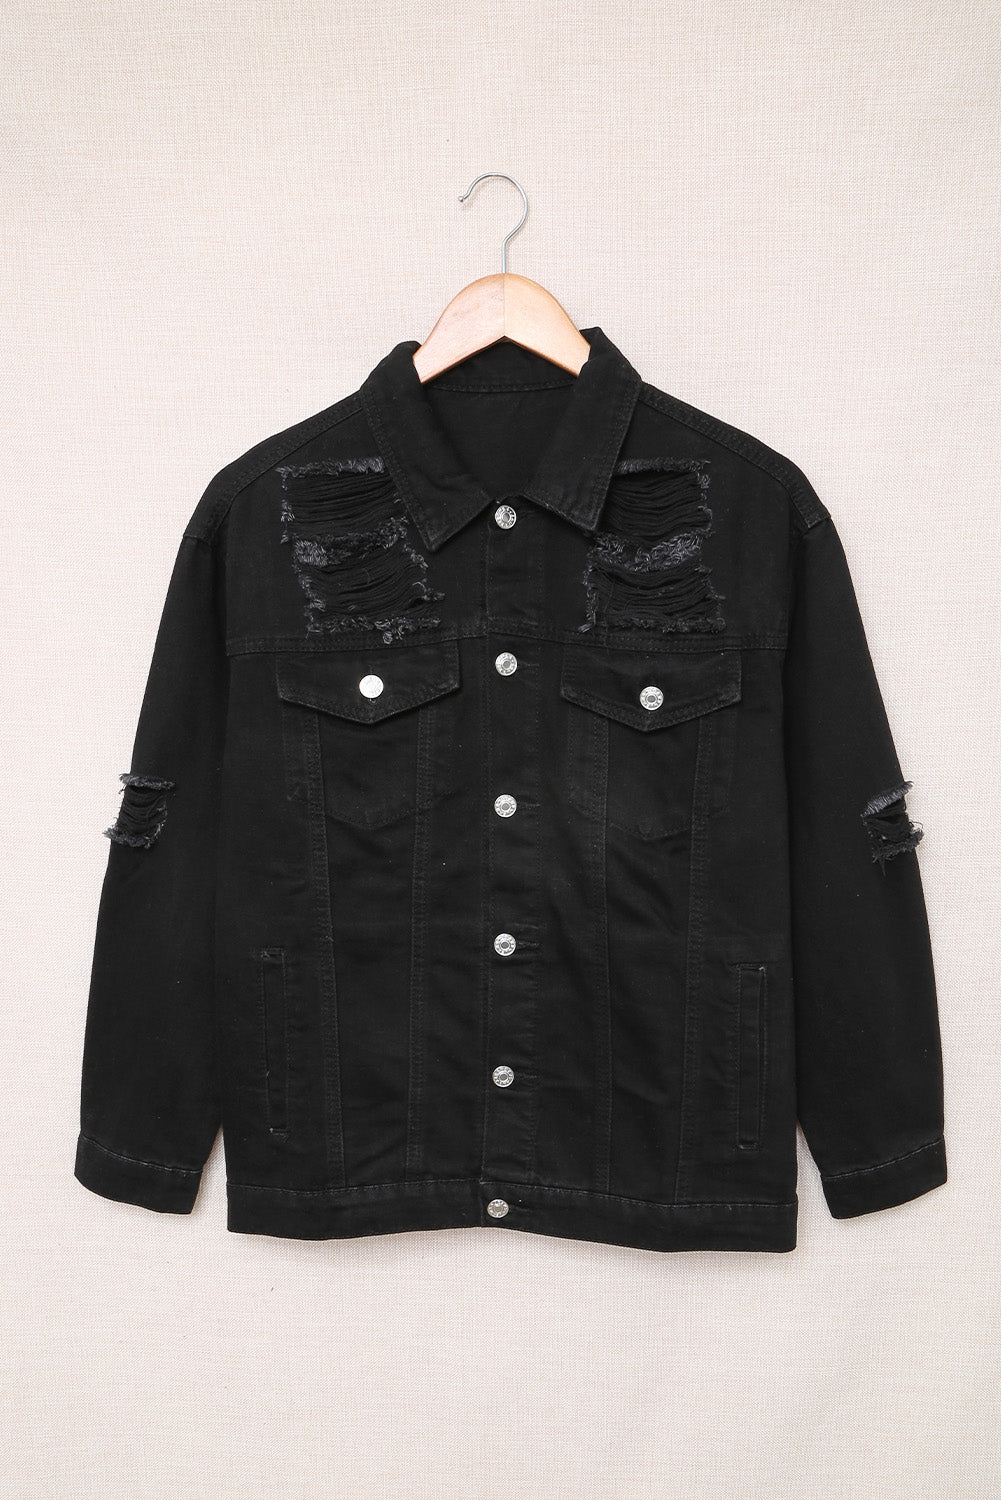 Distressed Button-Up Denim Jacket with Pockets OniTakai